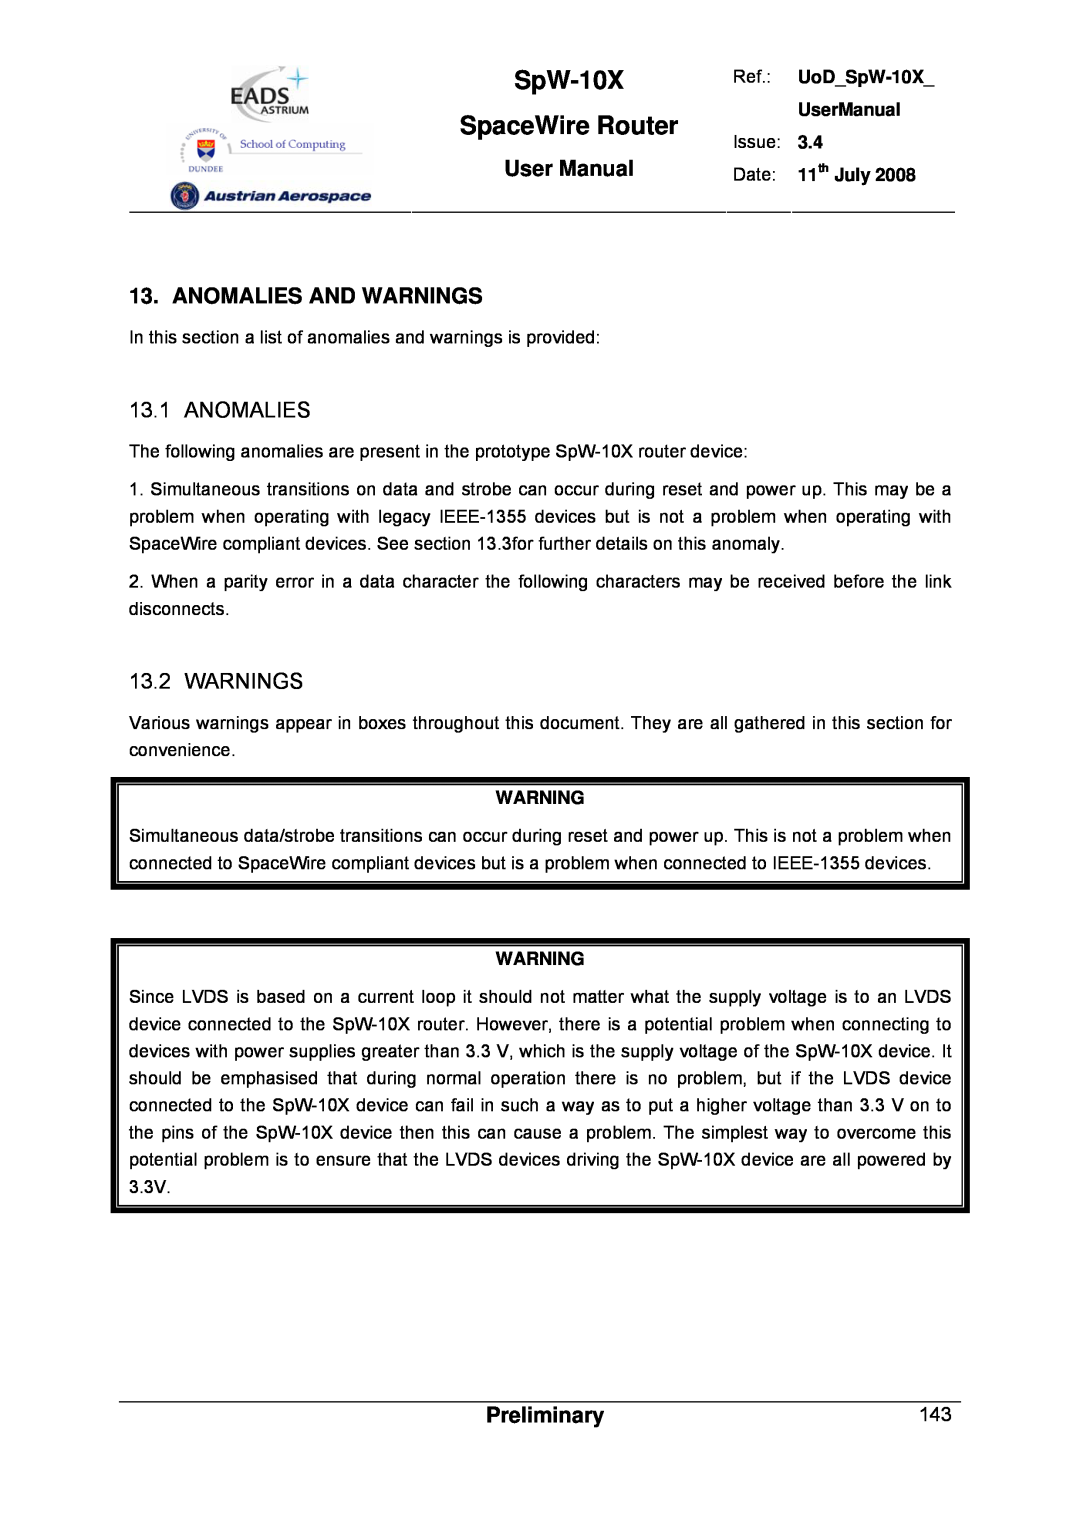 Atmel SpW-10X user manual Anomalies And Warnings, SpaceWire Router, User Manual, Preliminary 